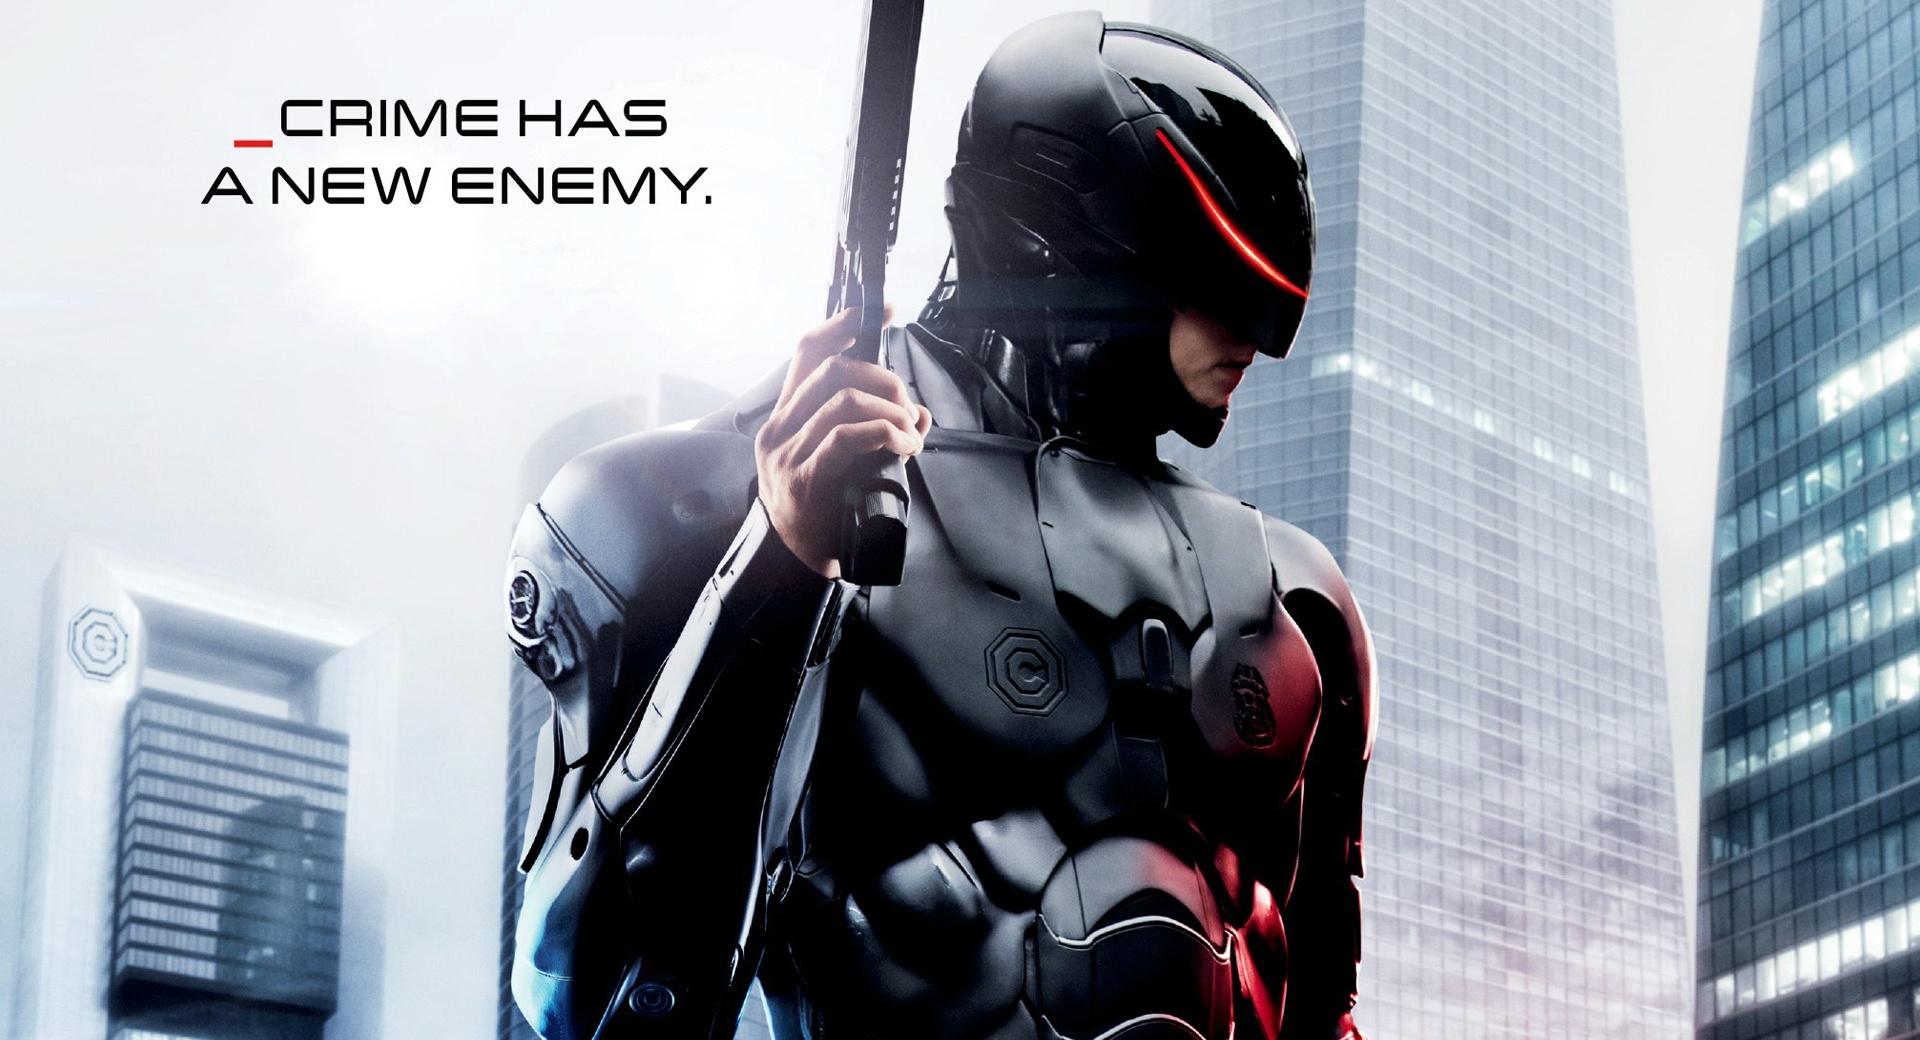 Robocop _crime has a new enemy wallpapers HD quality